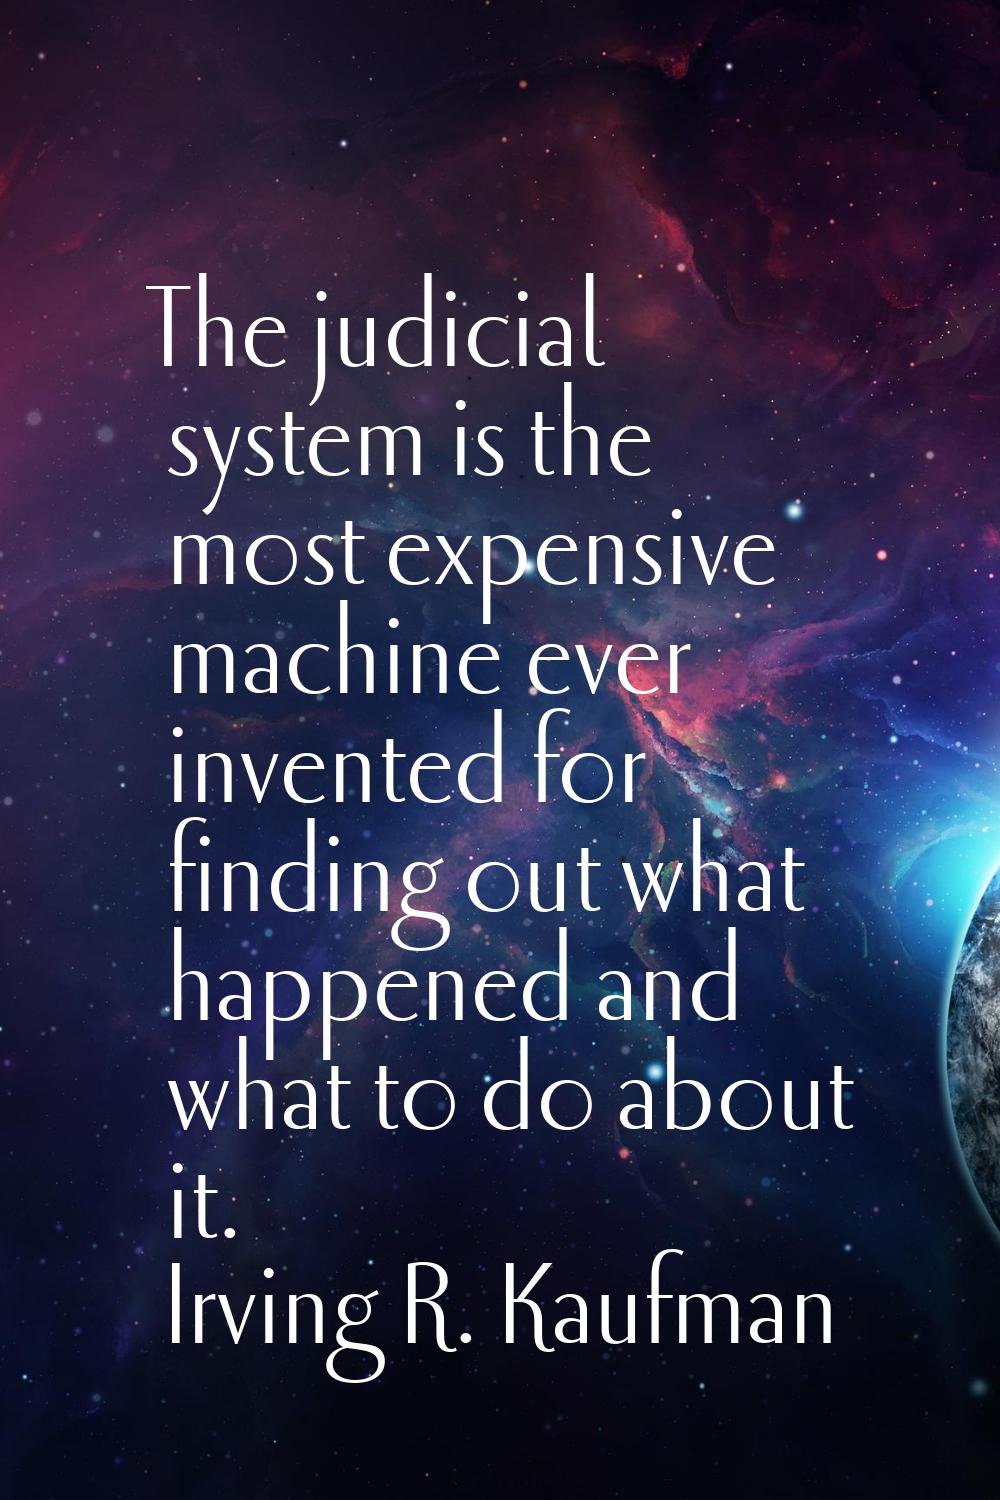 The judicial system is the most expensive machine ever invented for finding out what happened and w